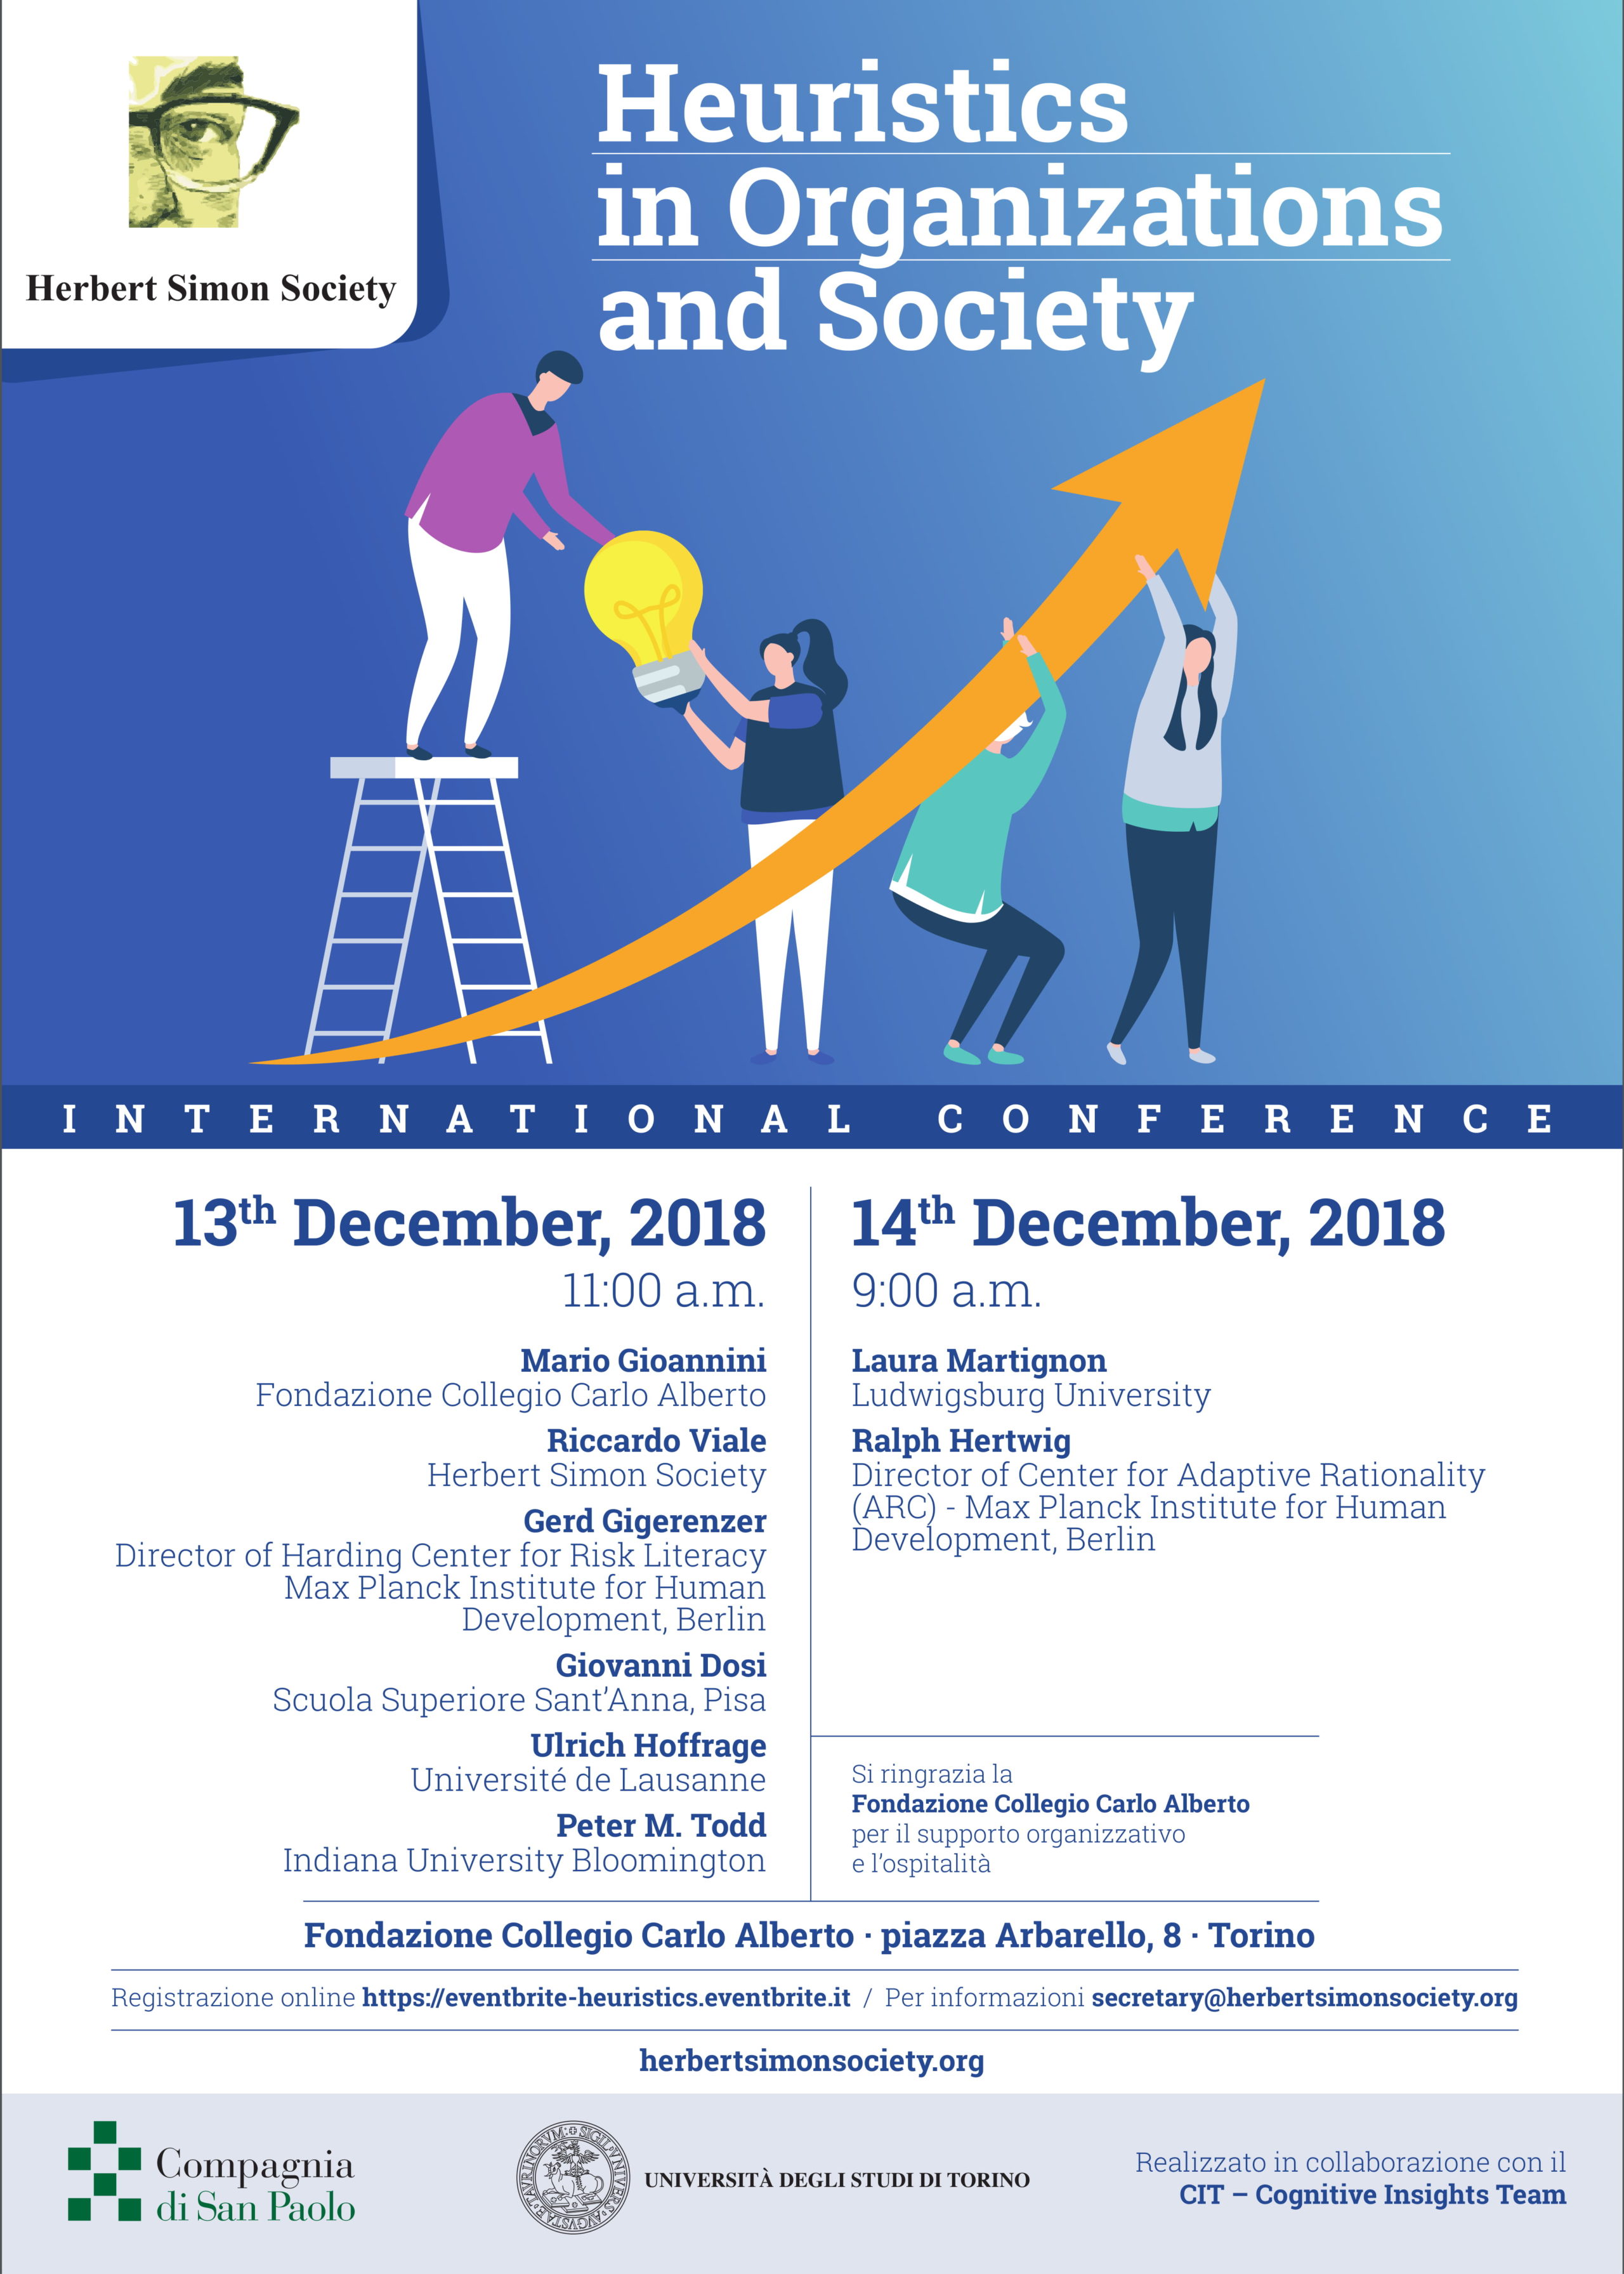 International Conference Heuristics in Organizations and Society